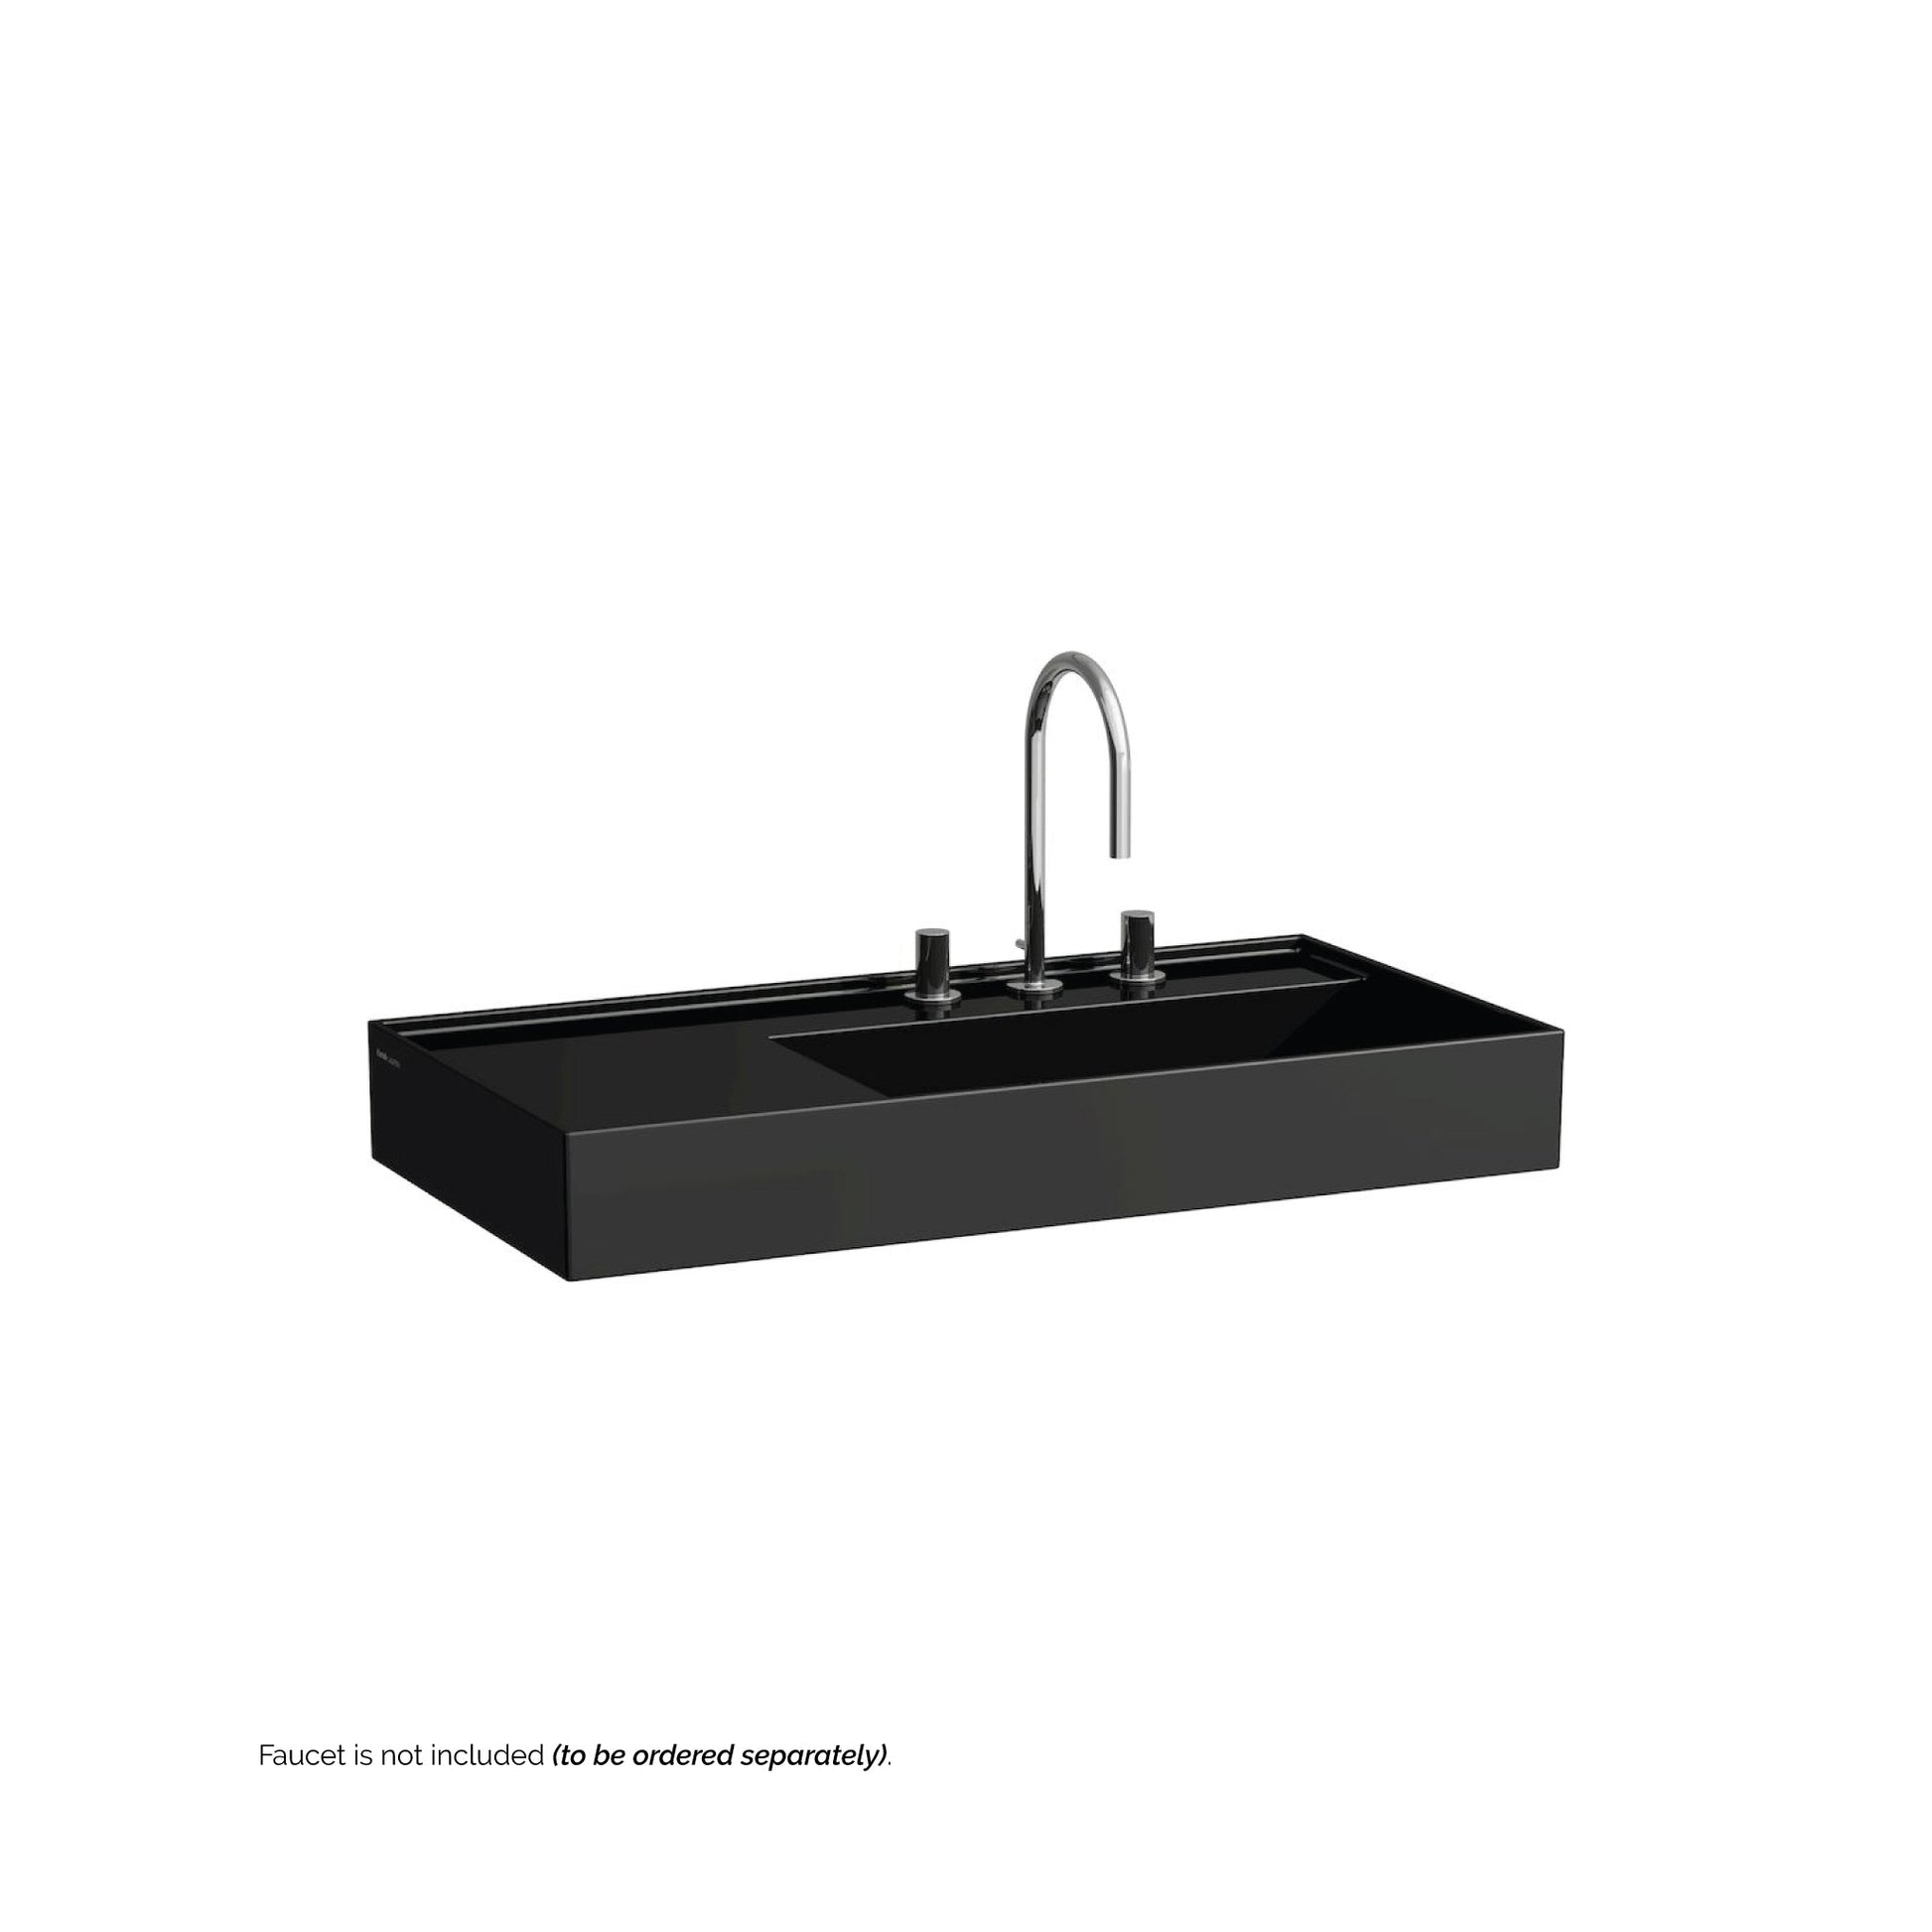 Laufen Kartell 35" x 18" Glossy Black Wall-Mounted Shelf-Left Bathroom Sink With 3 Faucet Holes